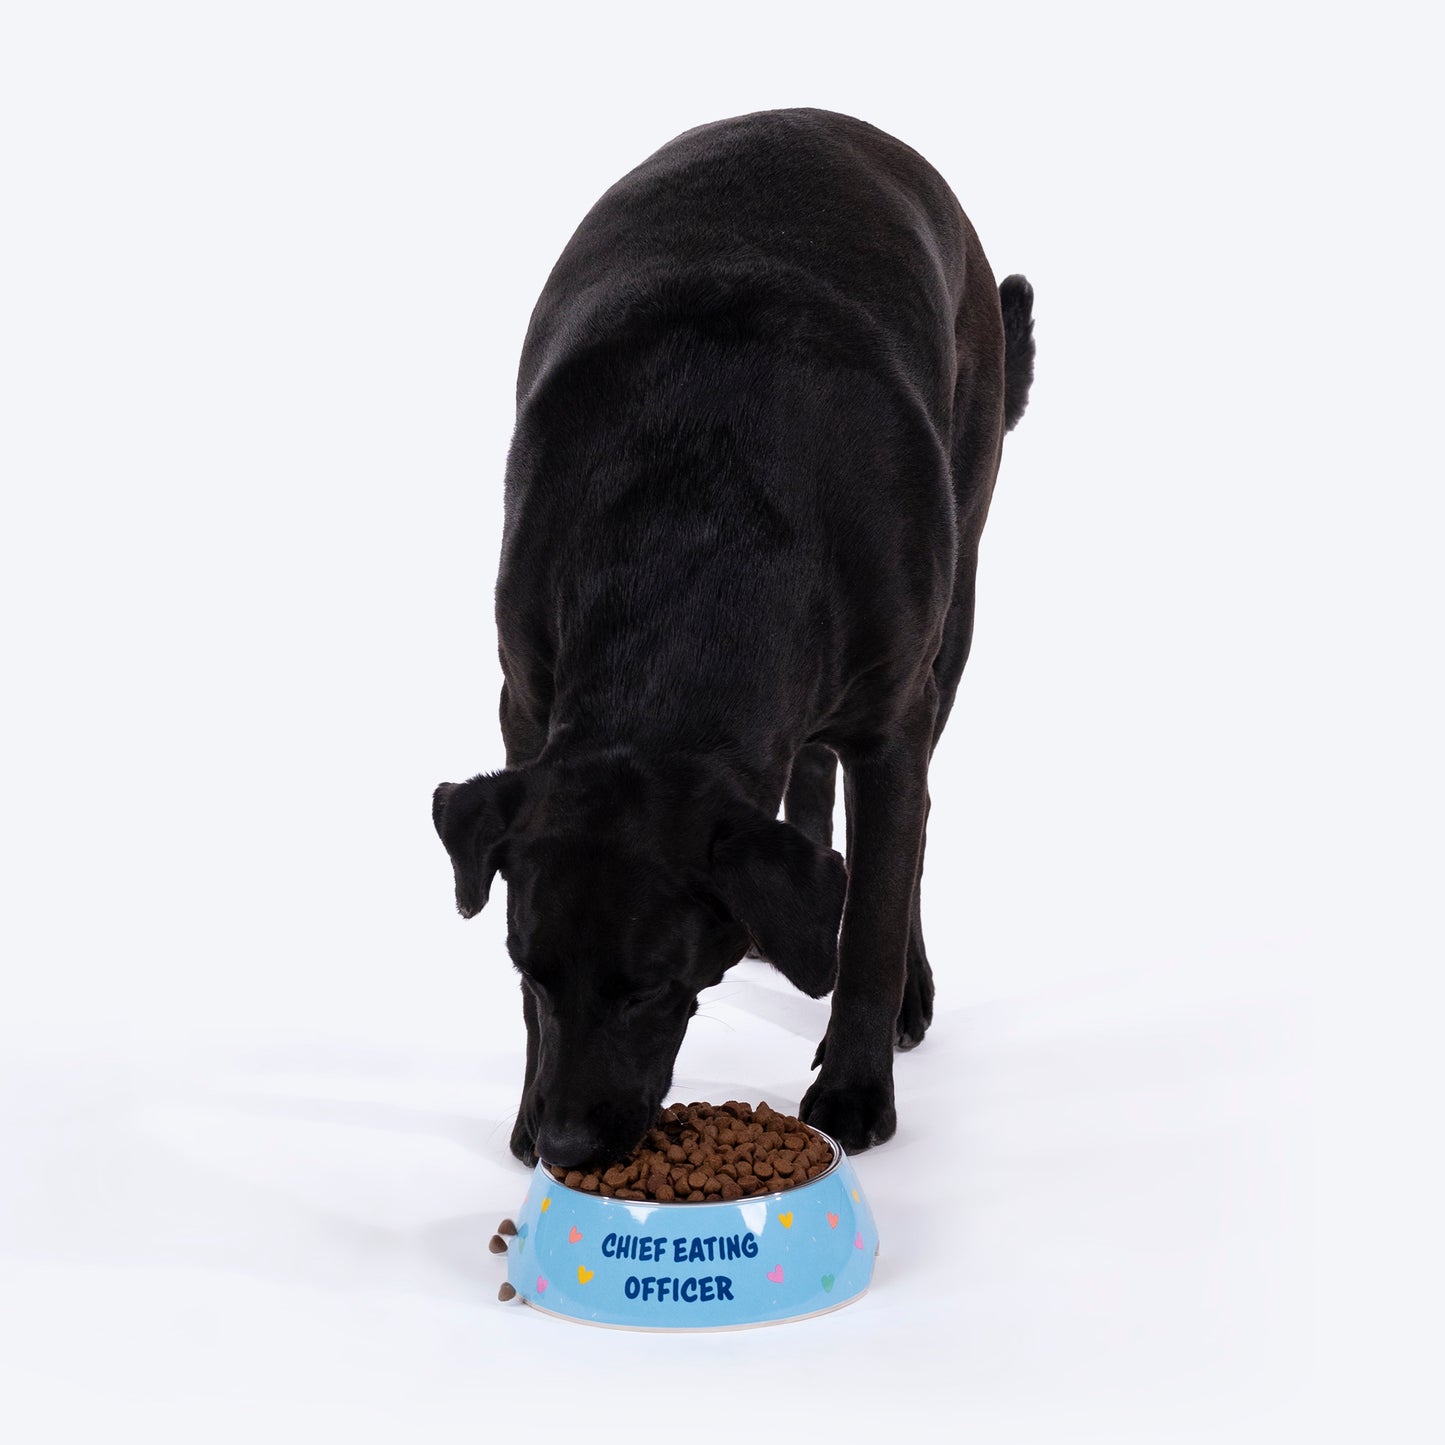 HUFT Chief Eating Officer Printed Melamine Bowl For Dogs - Skyblue - Heads Up For Tails